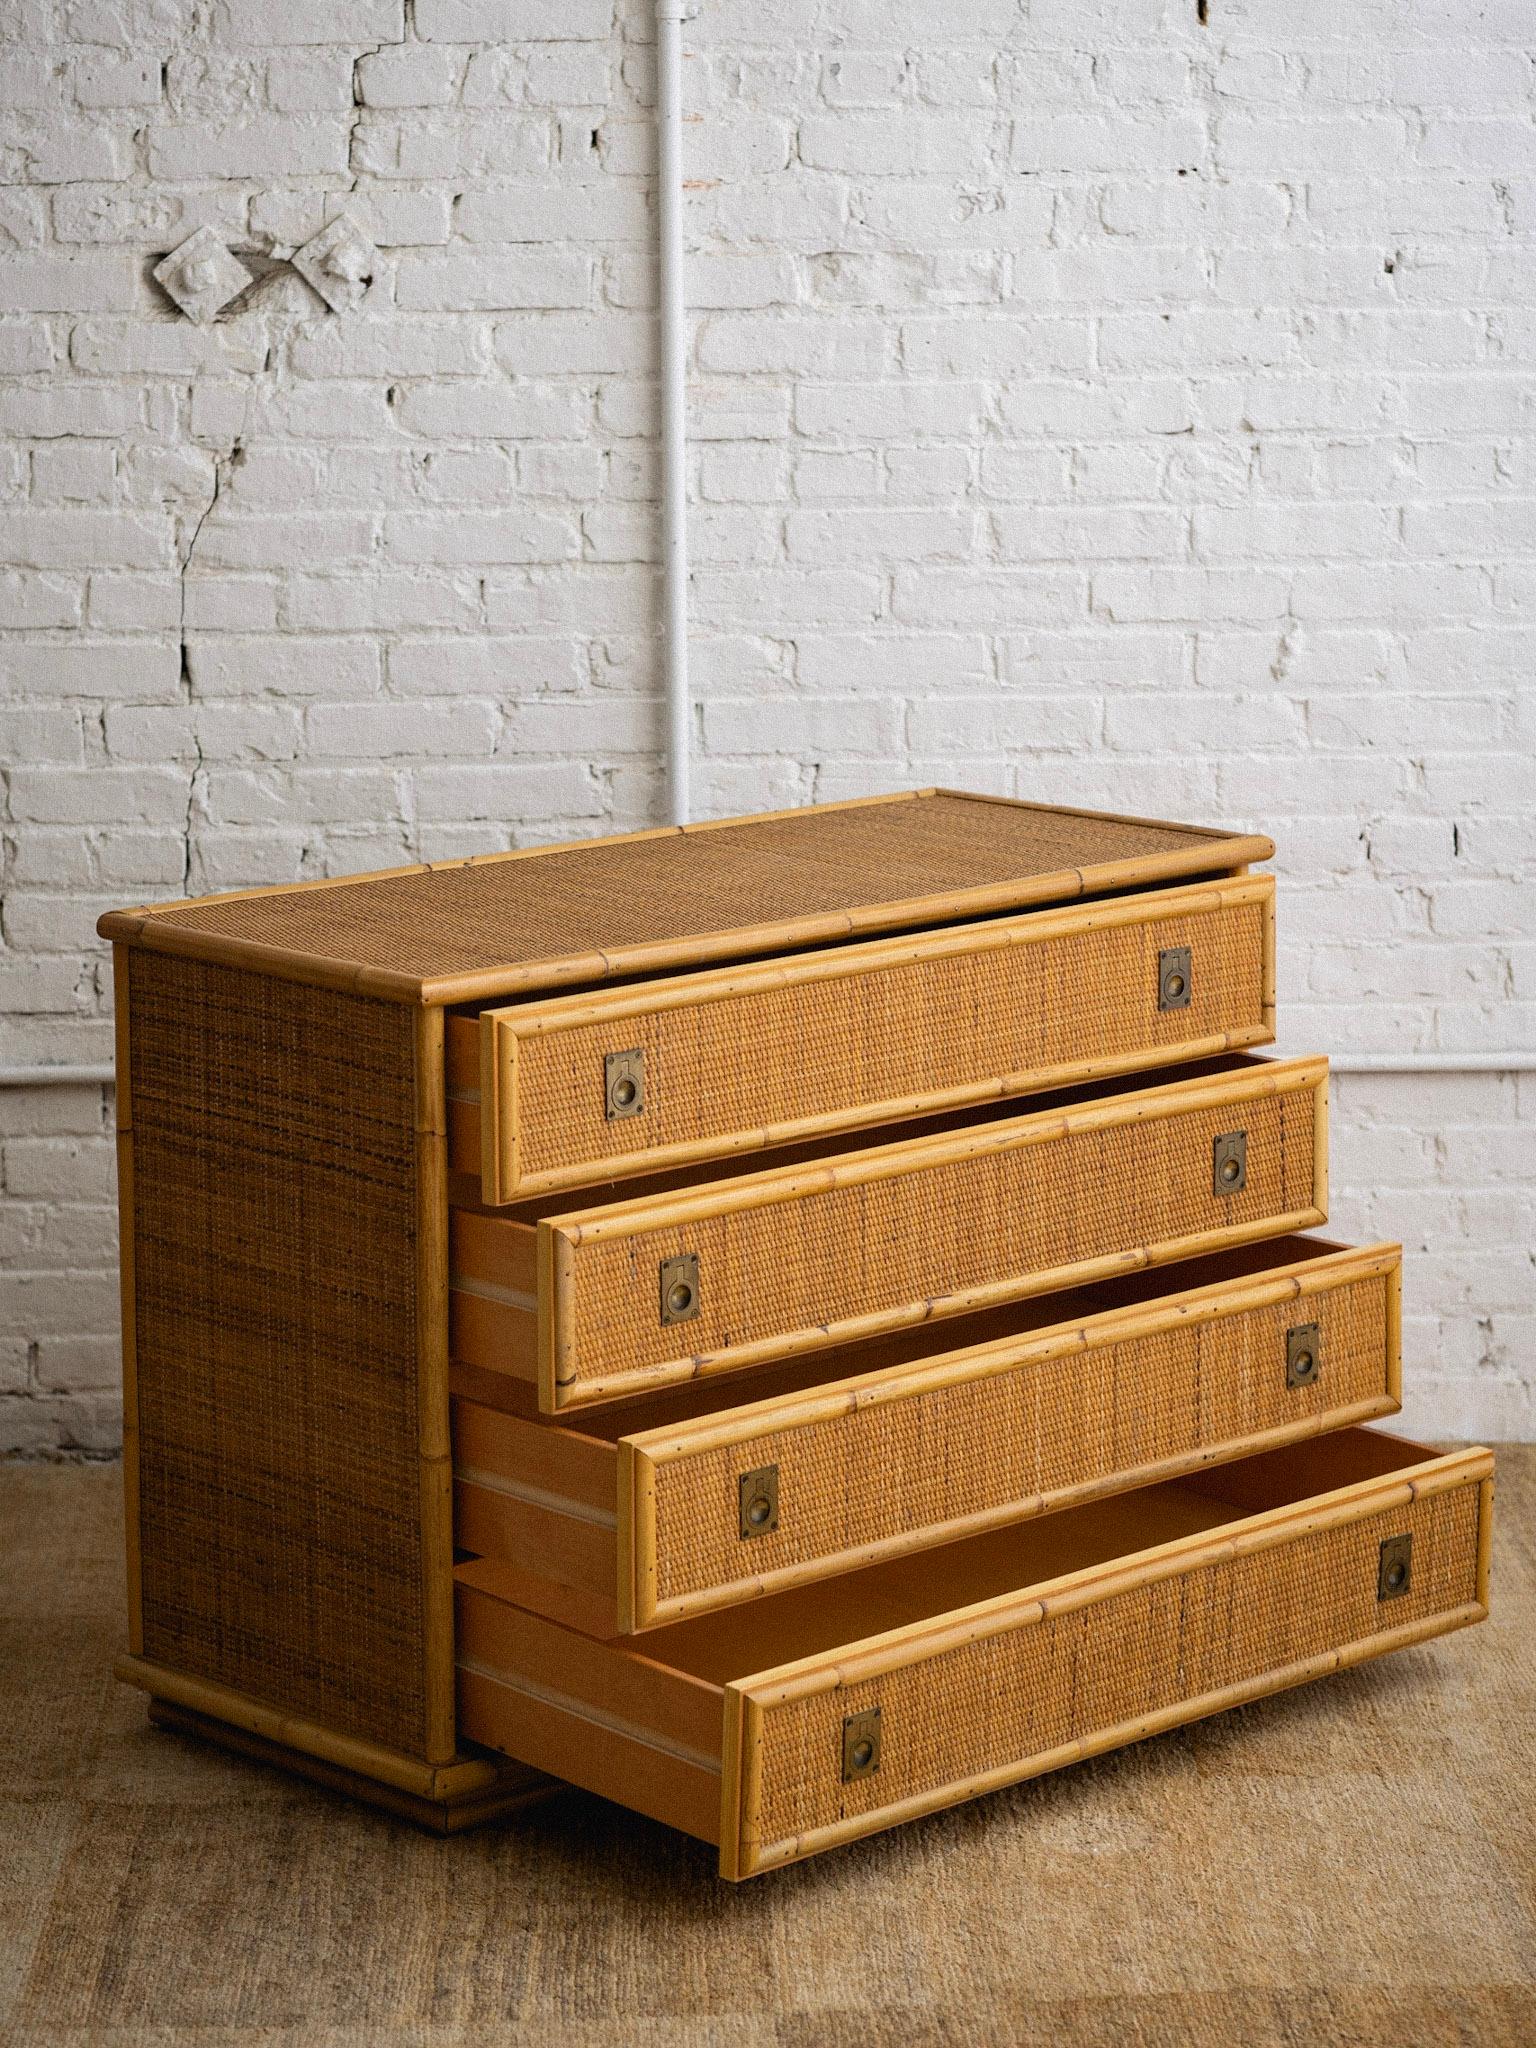 Campaign Italian Rattan Chest of Drawers by Dal Vera